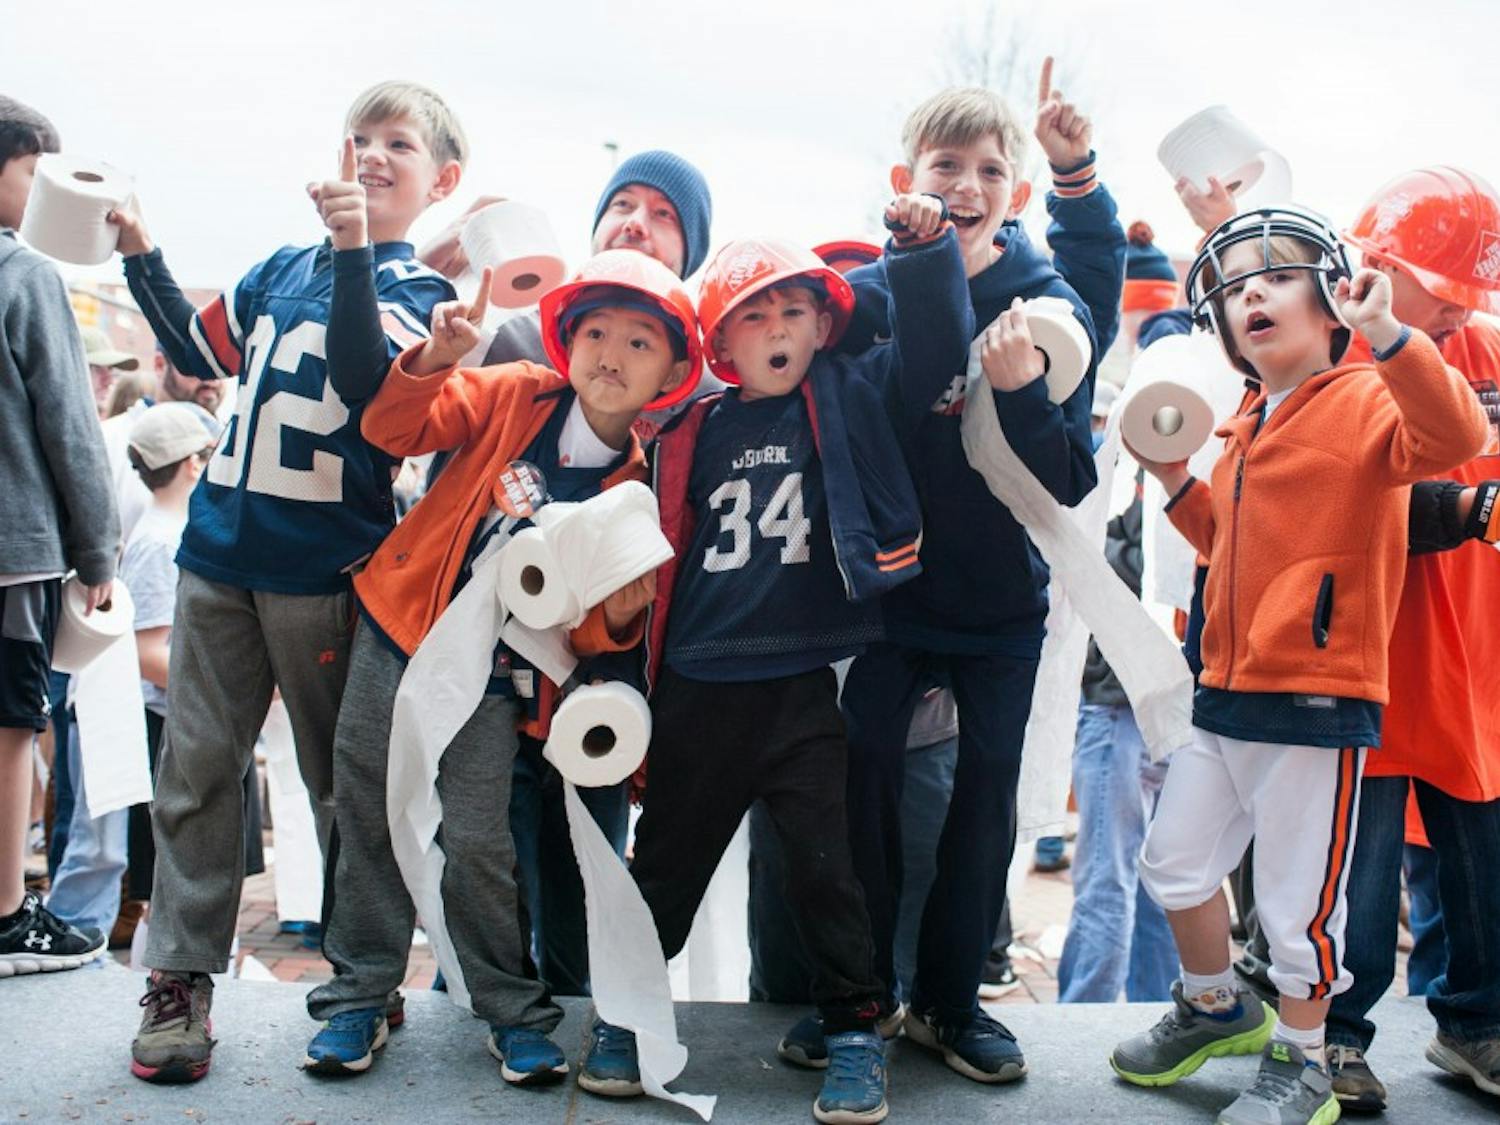 Young fans gather at Toomer's Corner for a rolling demonstration at the start of College Gameday. Auburn vs Alabama on Saturday, Nov. 25 in Auburn, Ala.